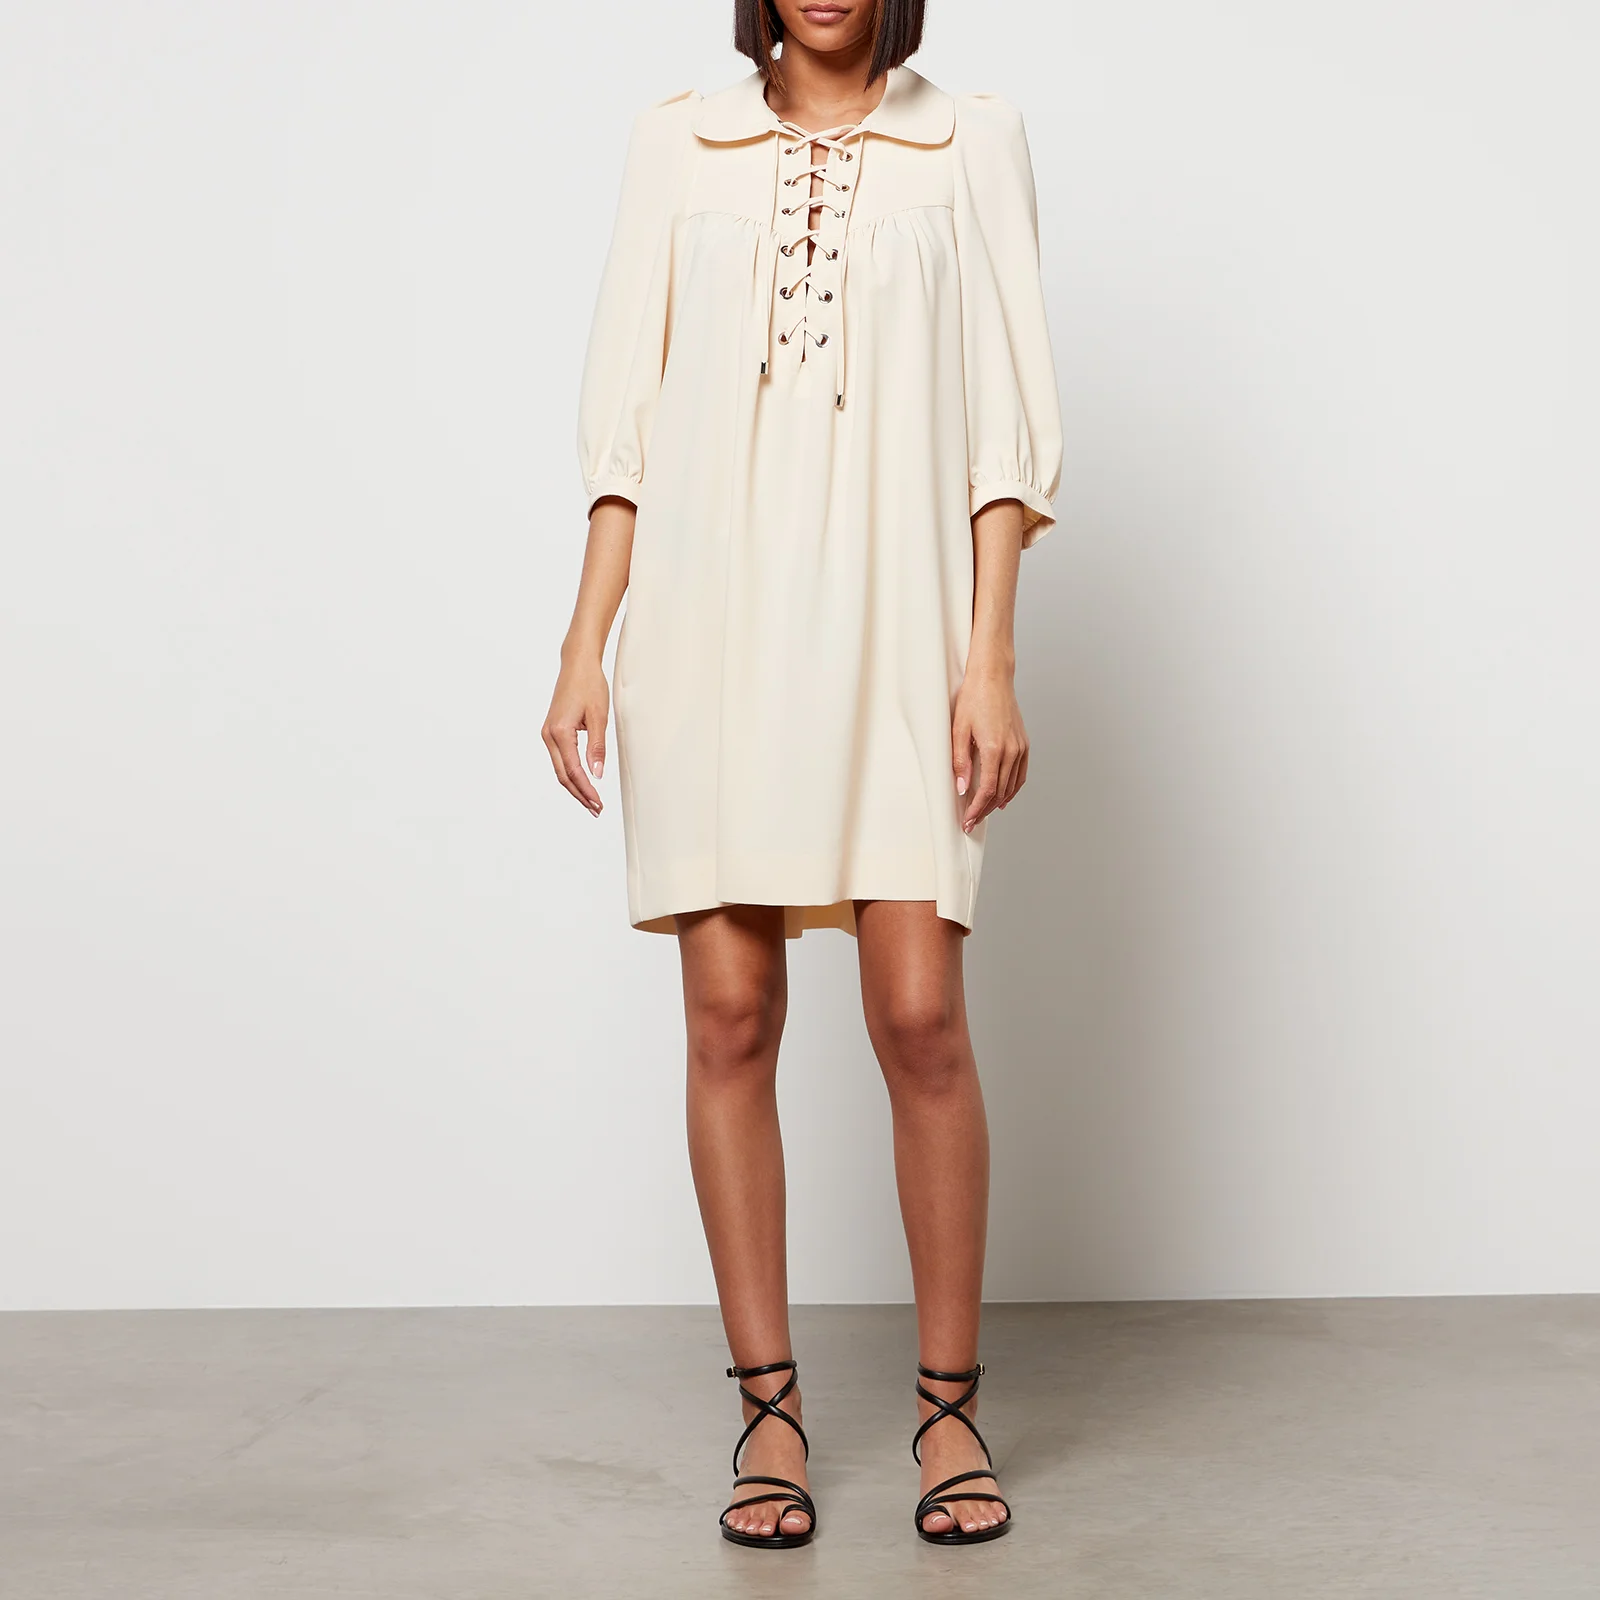 See By Chloe Women's Lace Up Shirt Dress - Milk Image 1